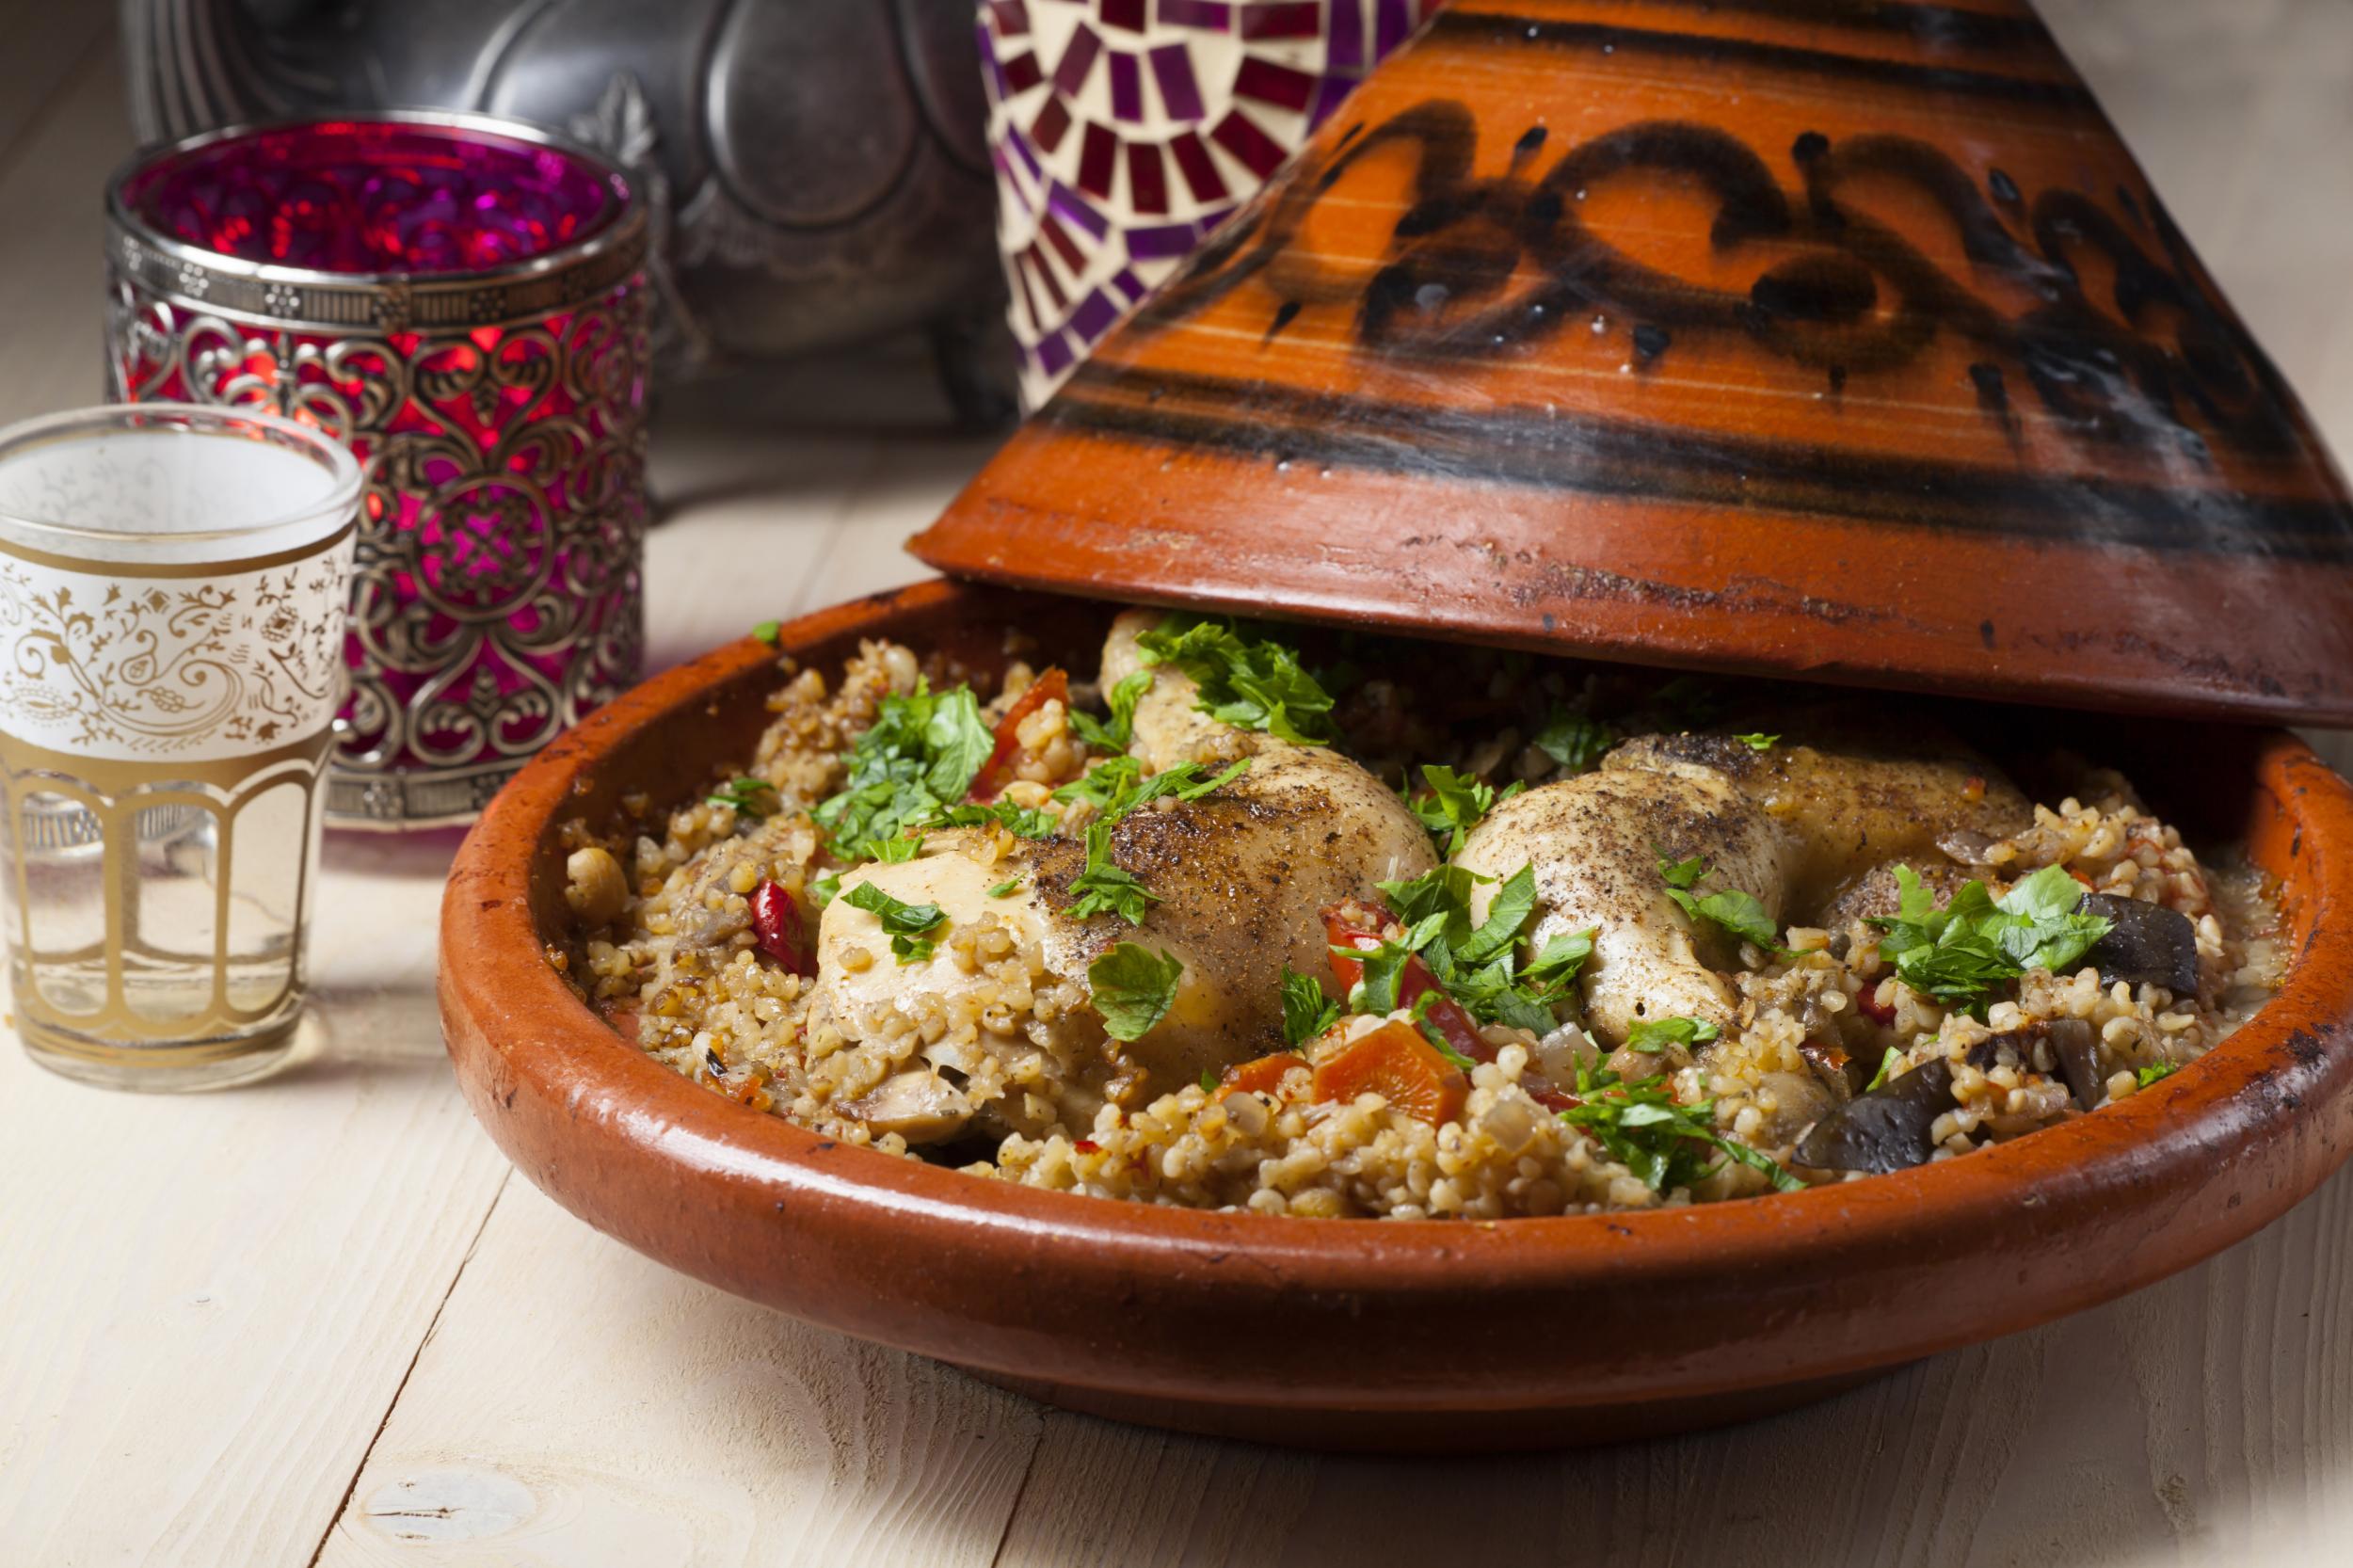 Tuck into a tasty tagine